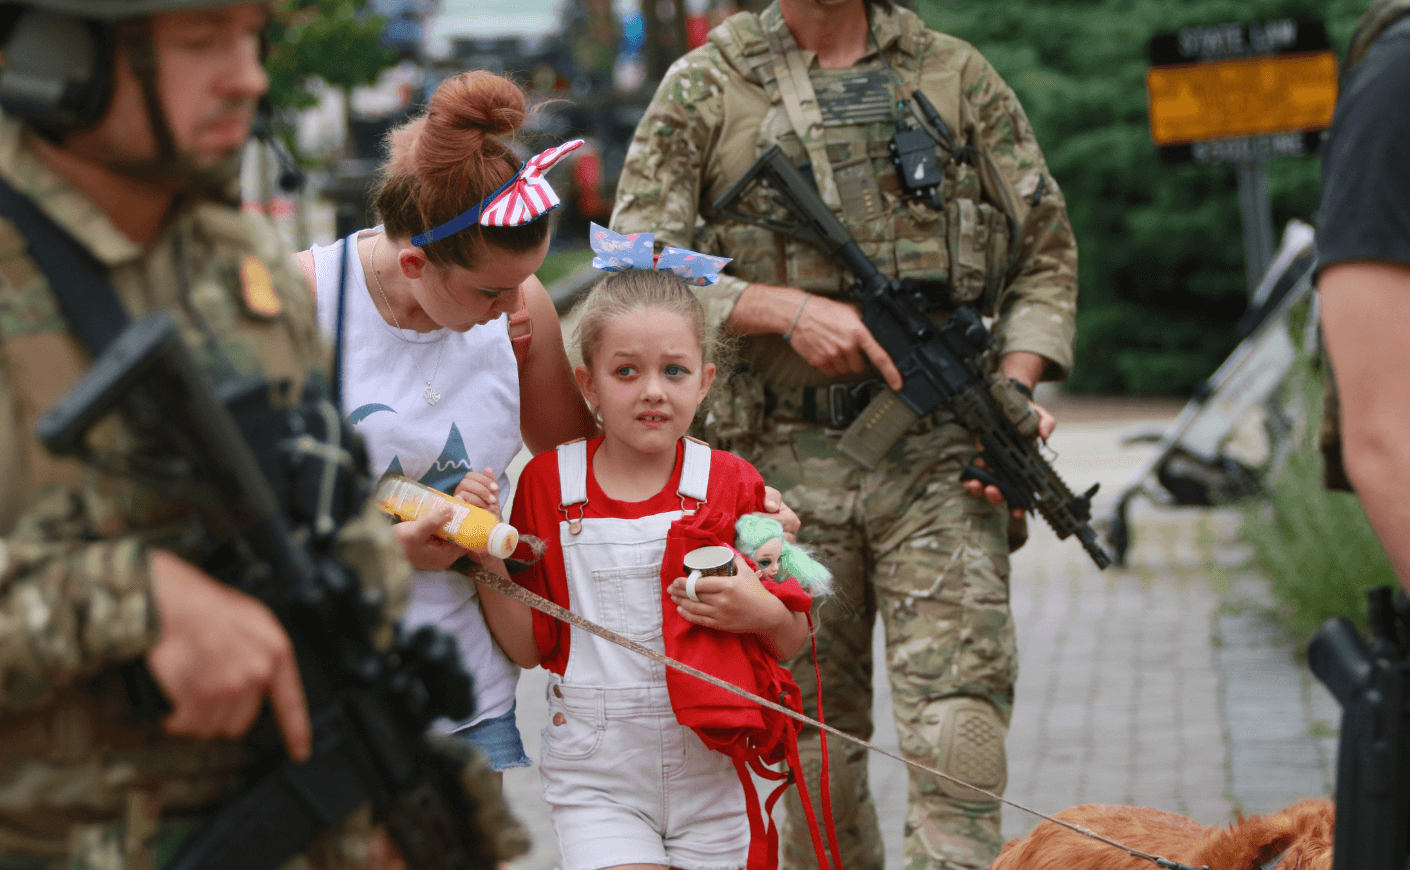 a scared little girl surrounded by military with guns